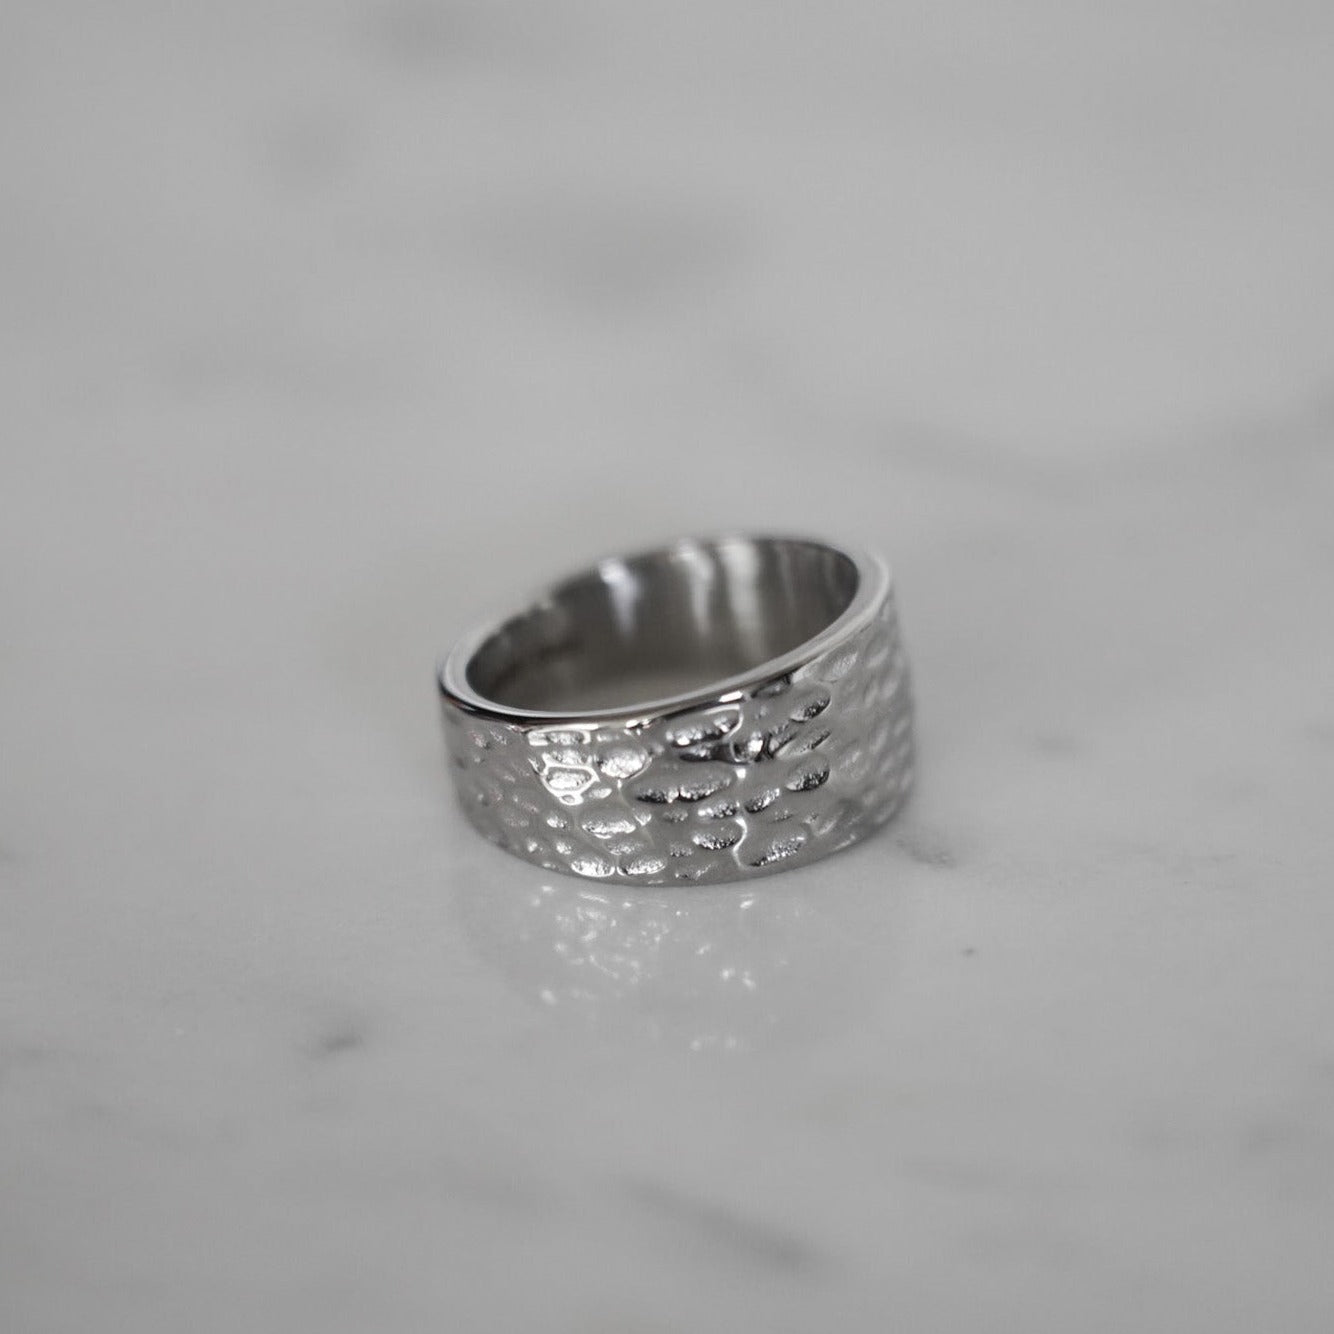 Hammered Signature - Silver-toned ring